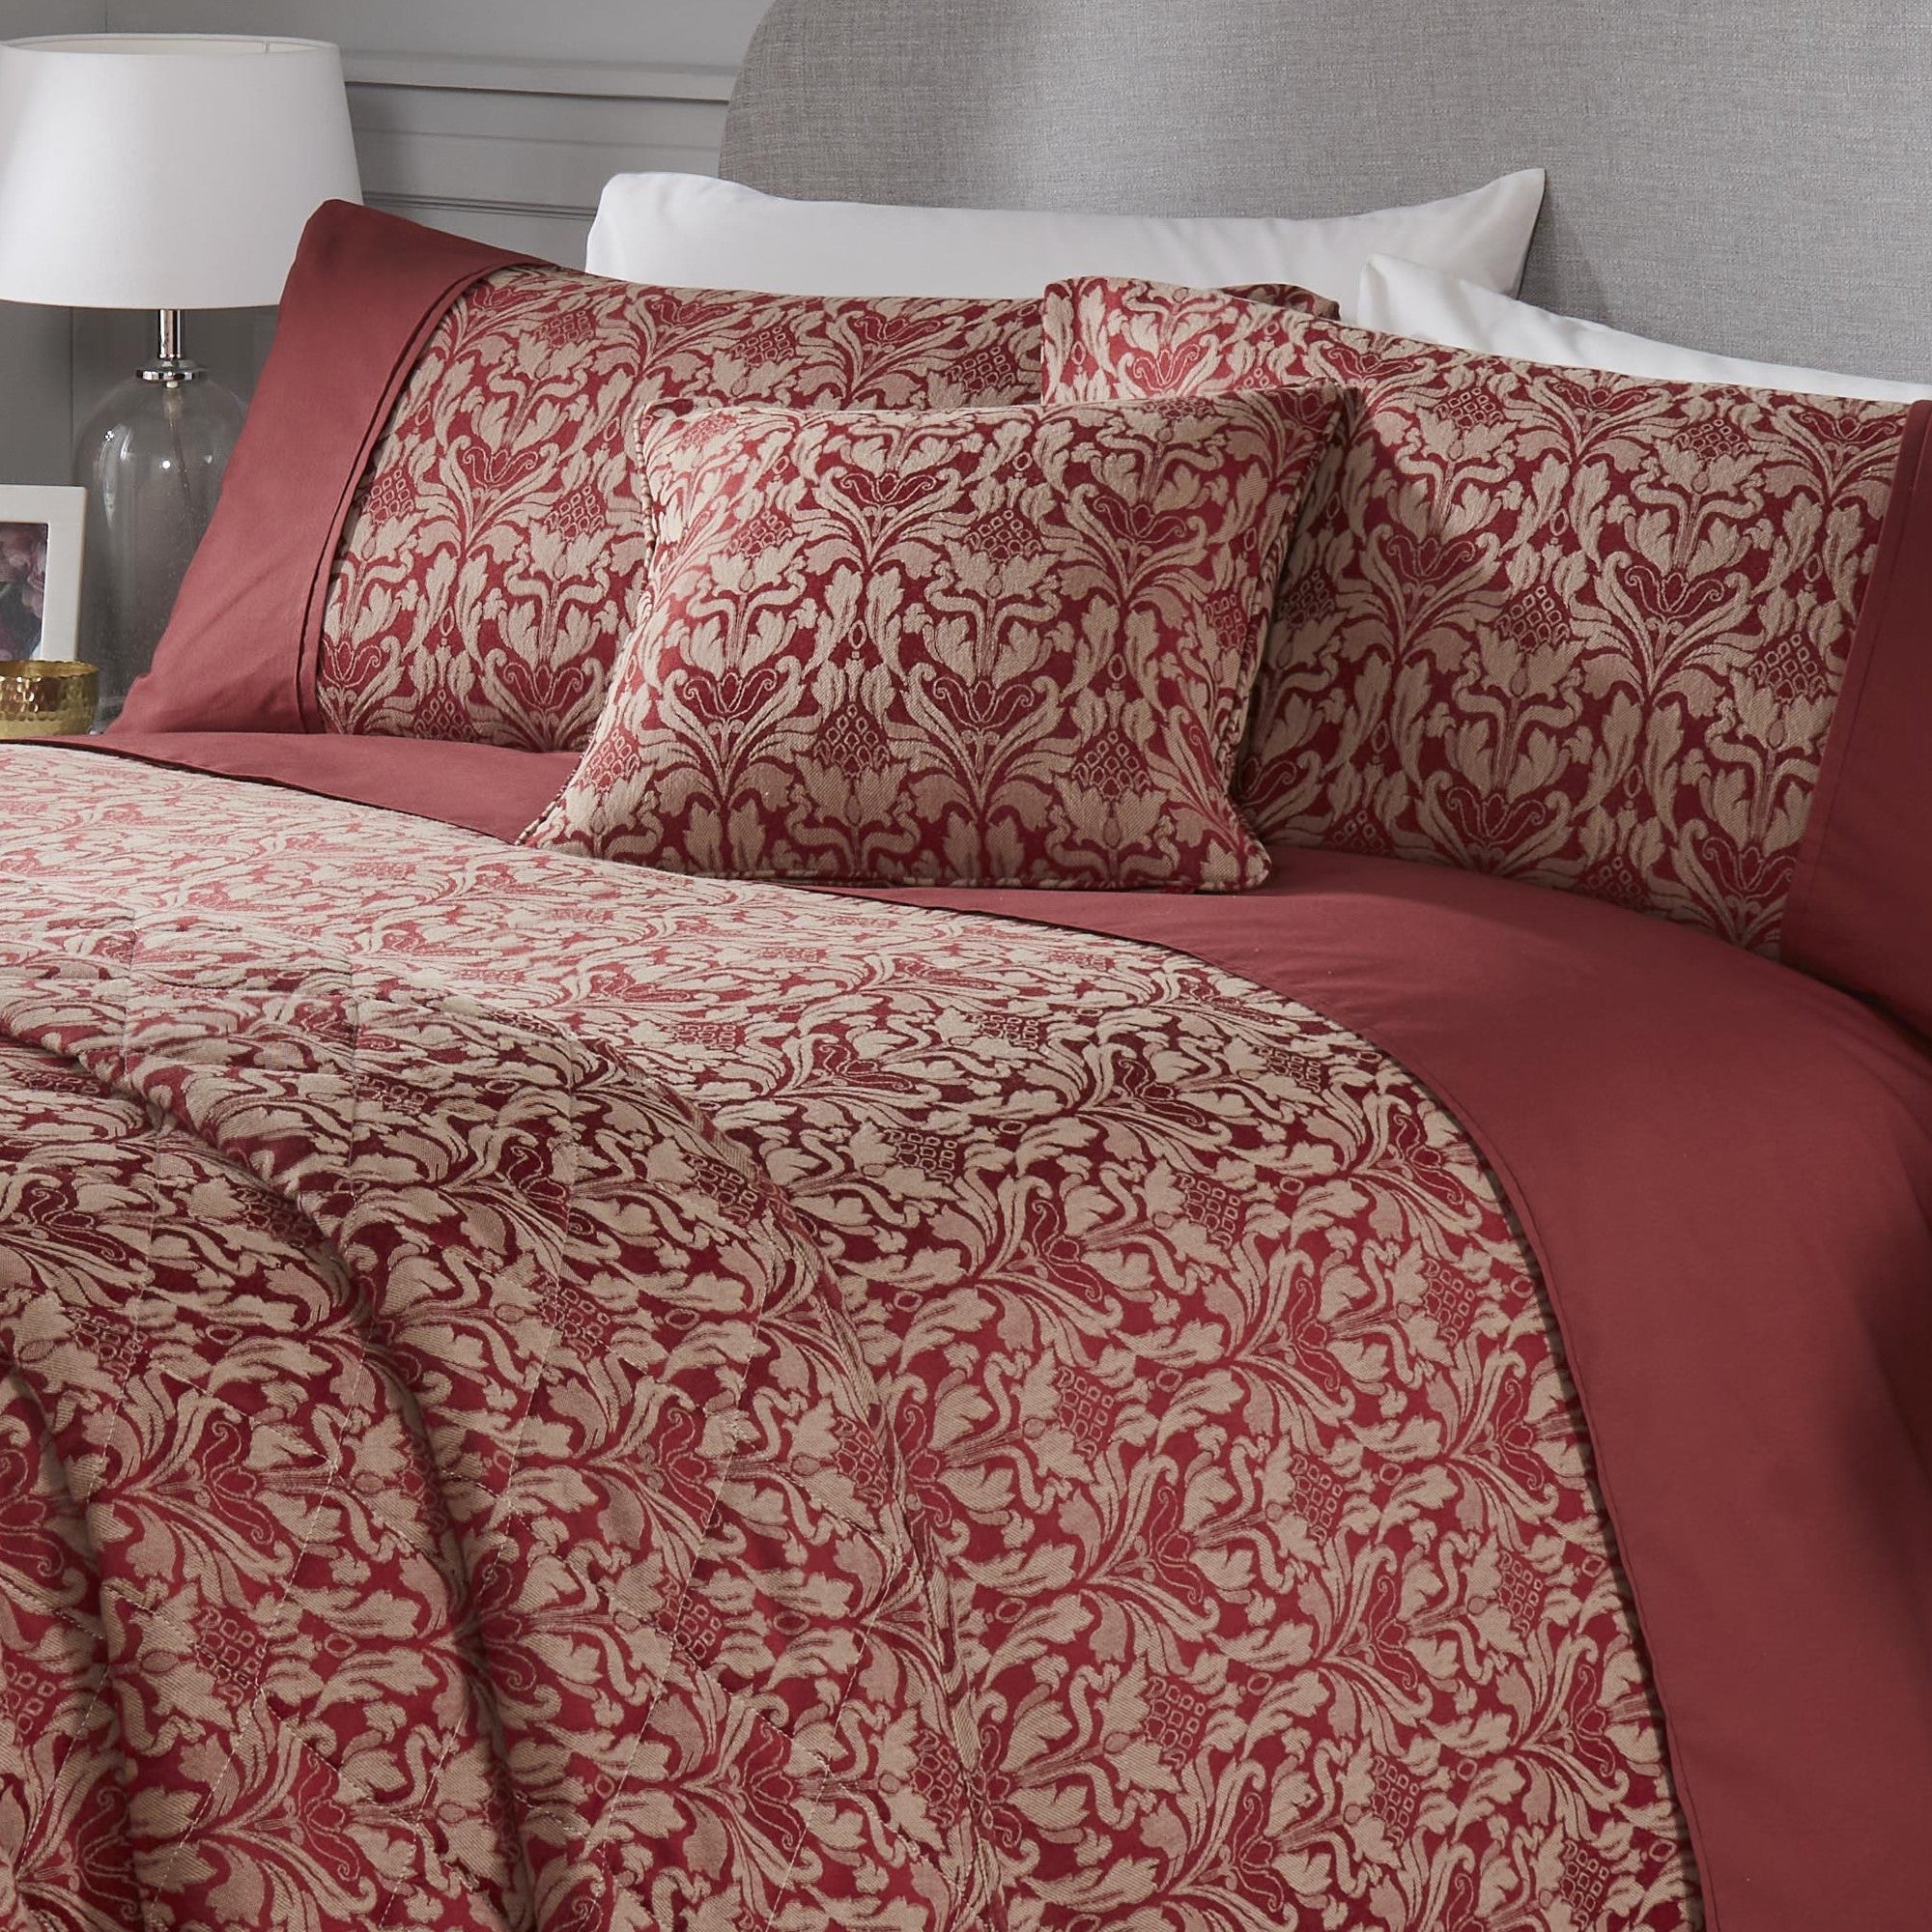 Filled Cushion Hawthorne by Dreams & Drapes Woven in Burgundy